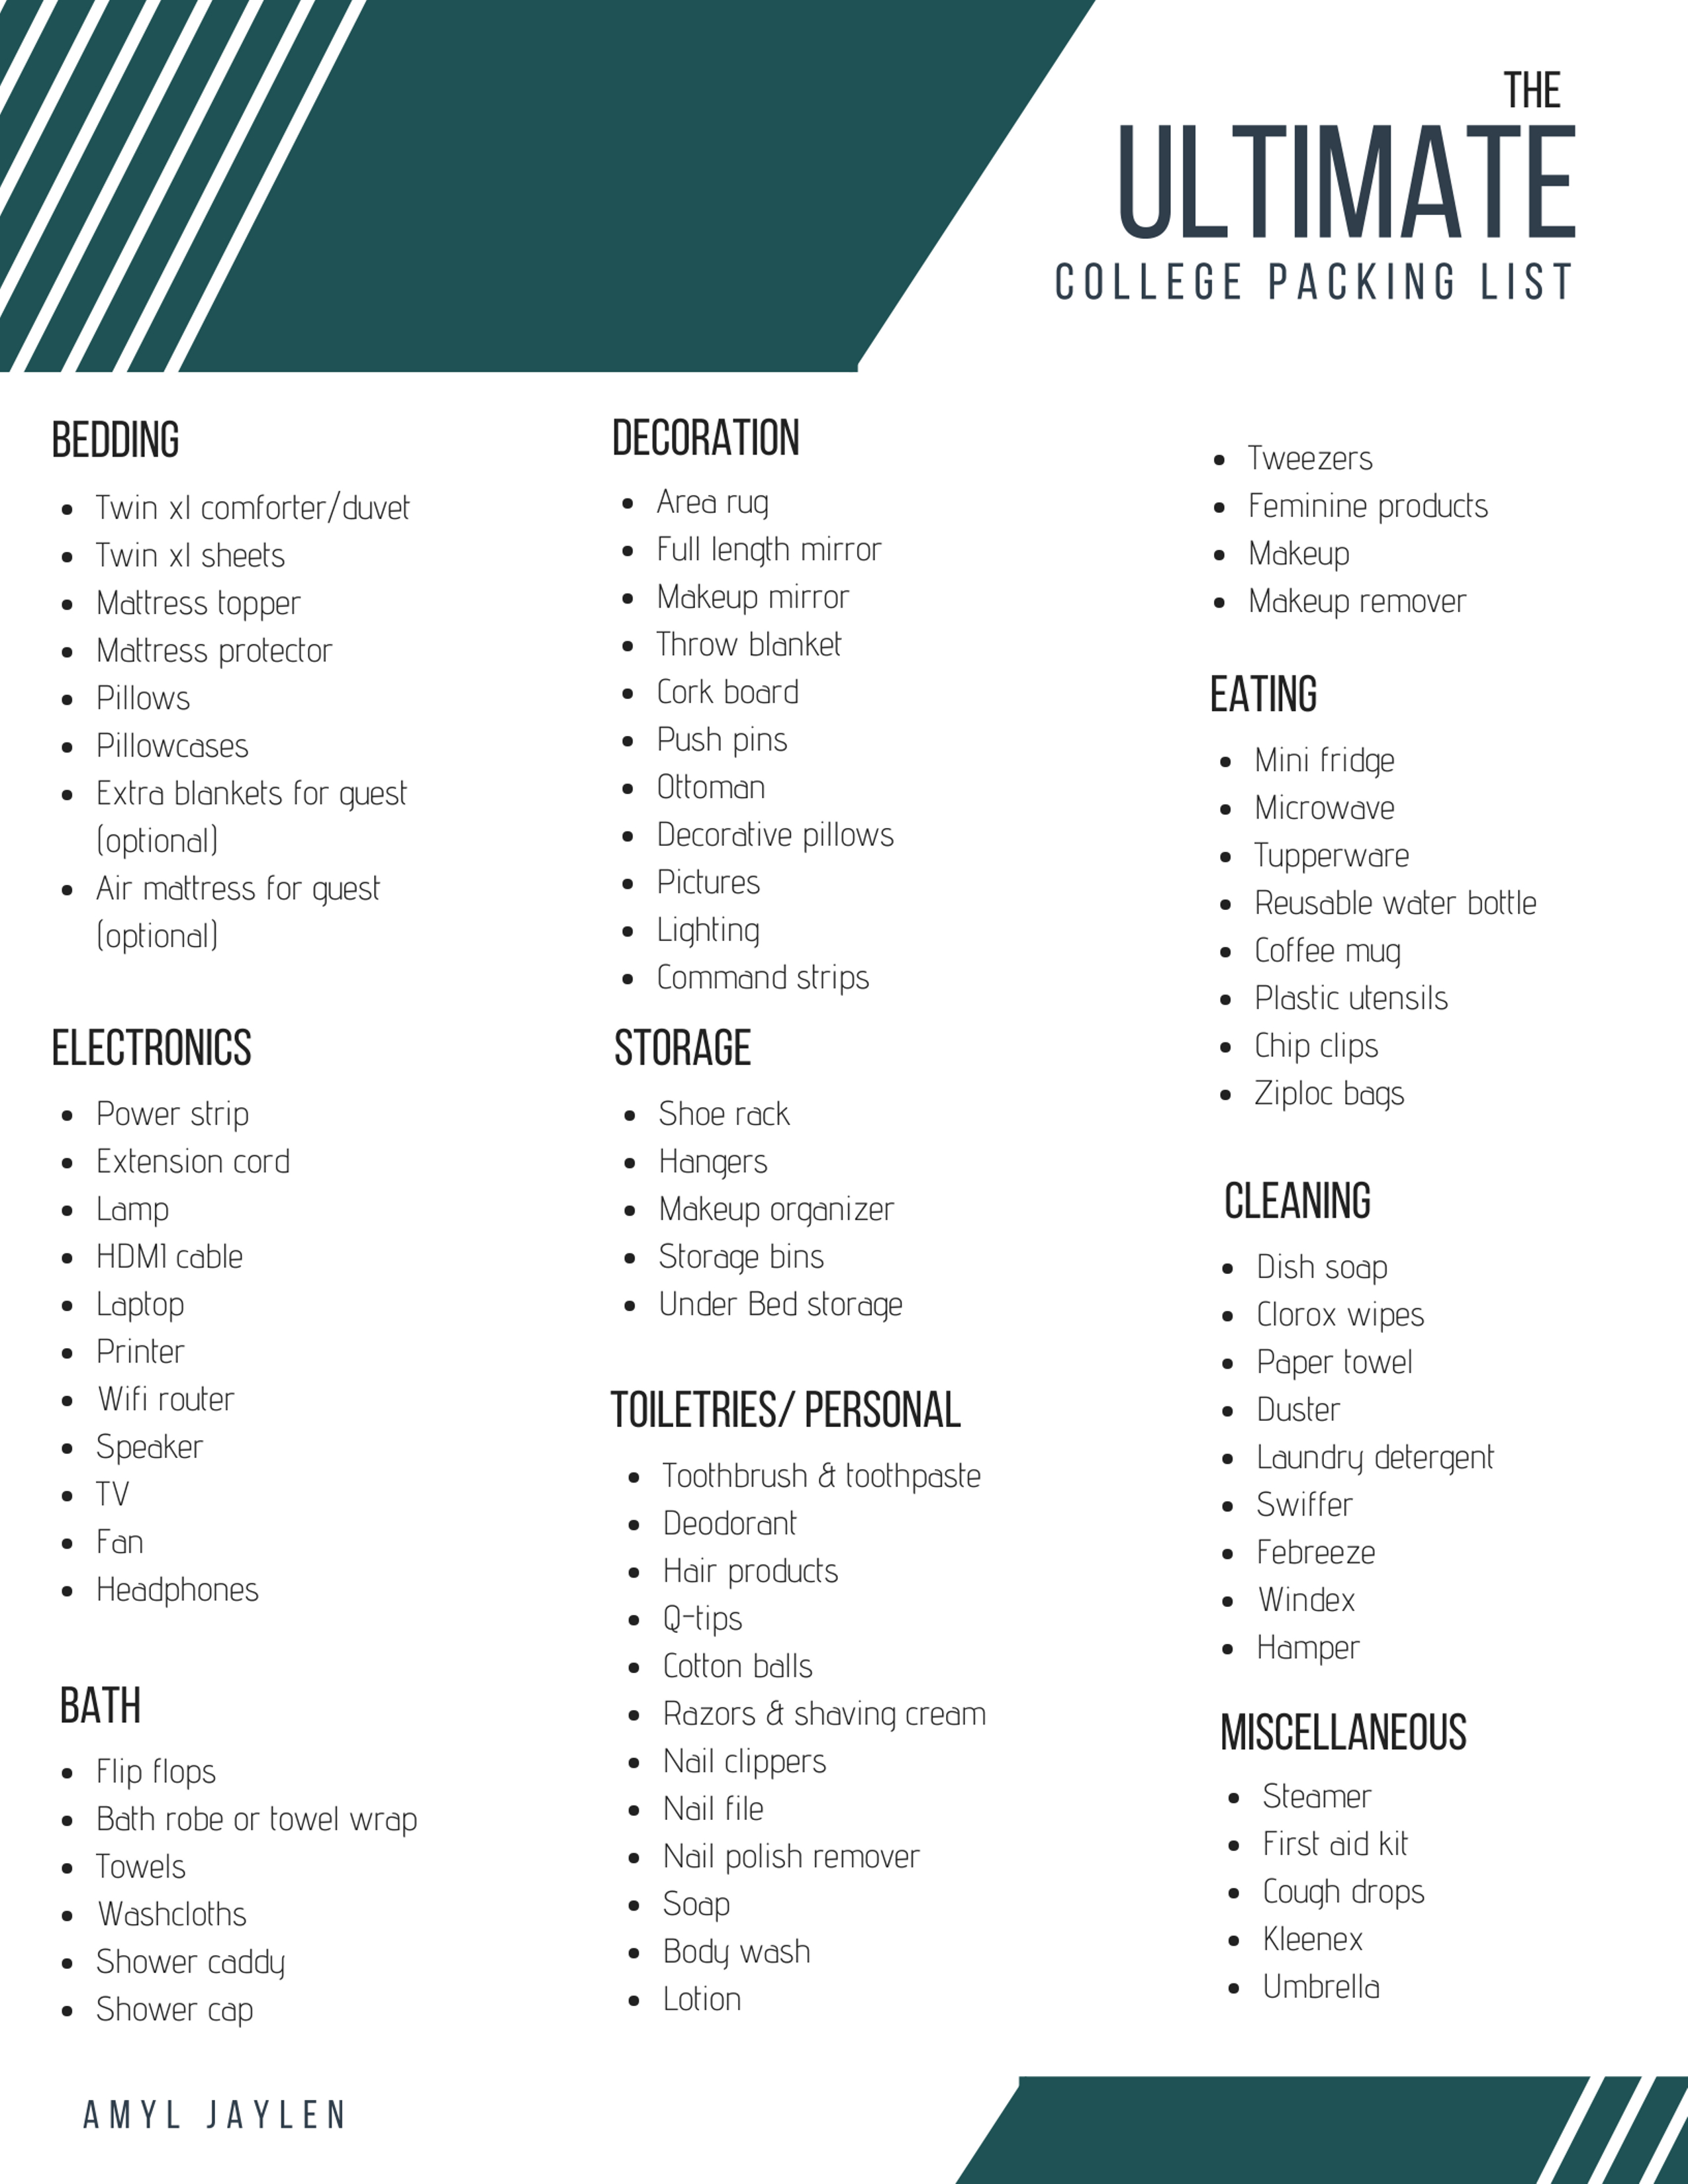 the-ultimate-college-packing-list-amyl-jaylen